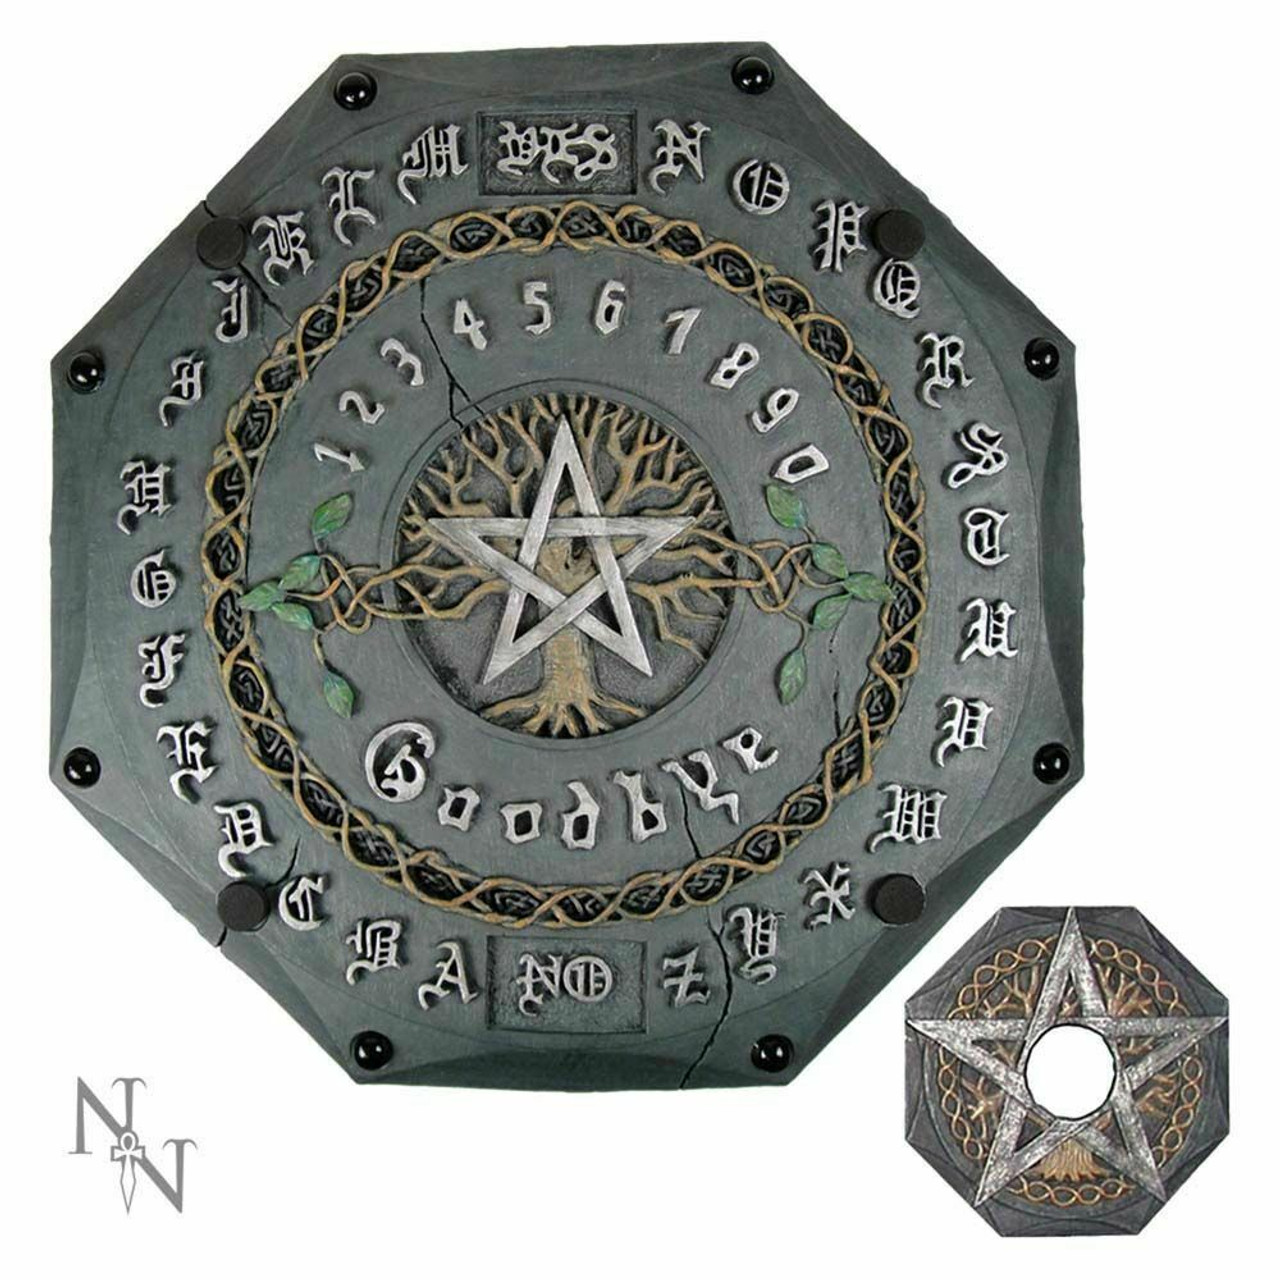 Nemesis Now Tree of Life Talking Spirit Board Ouija Witch Wiccan